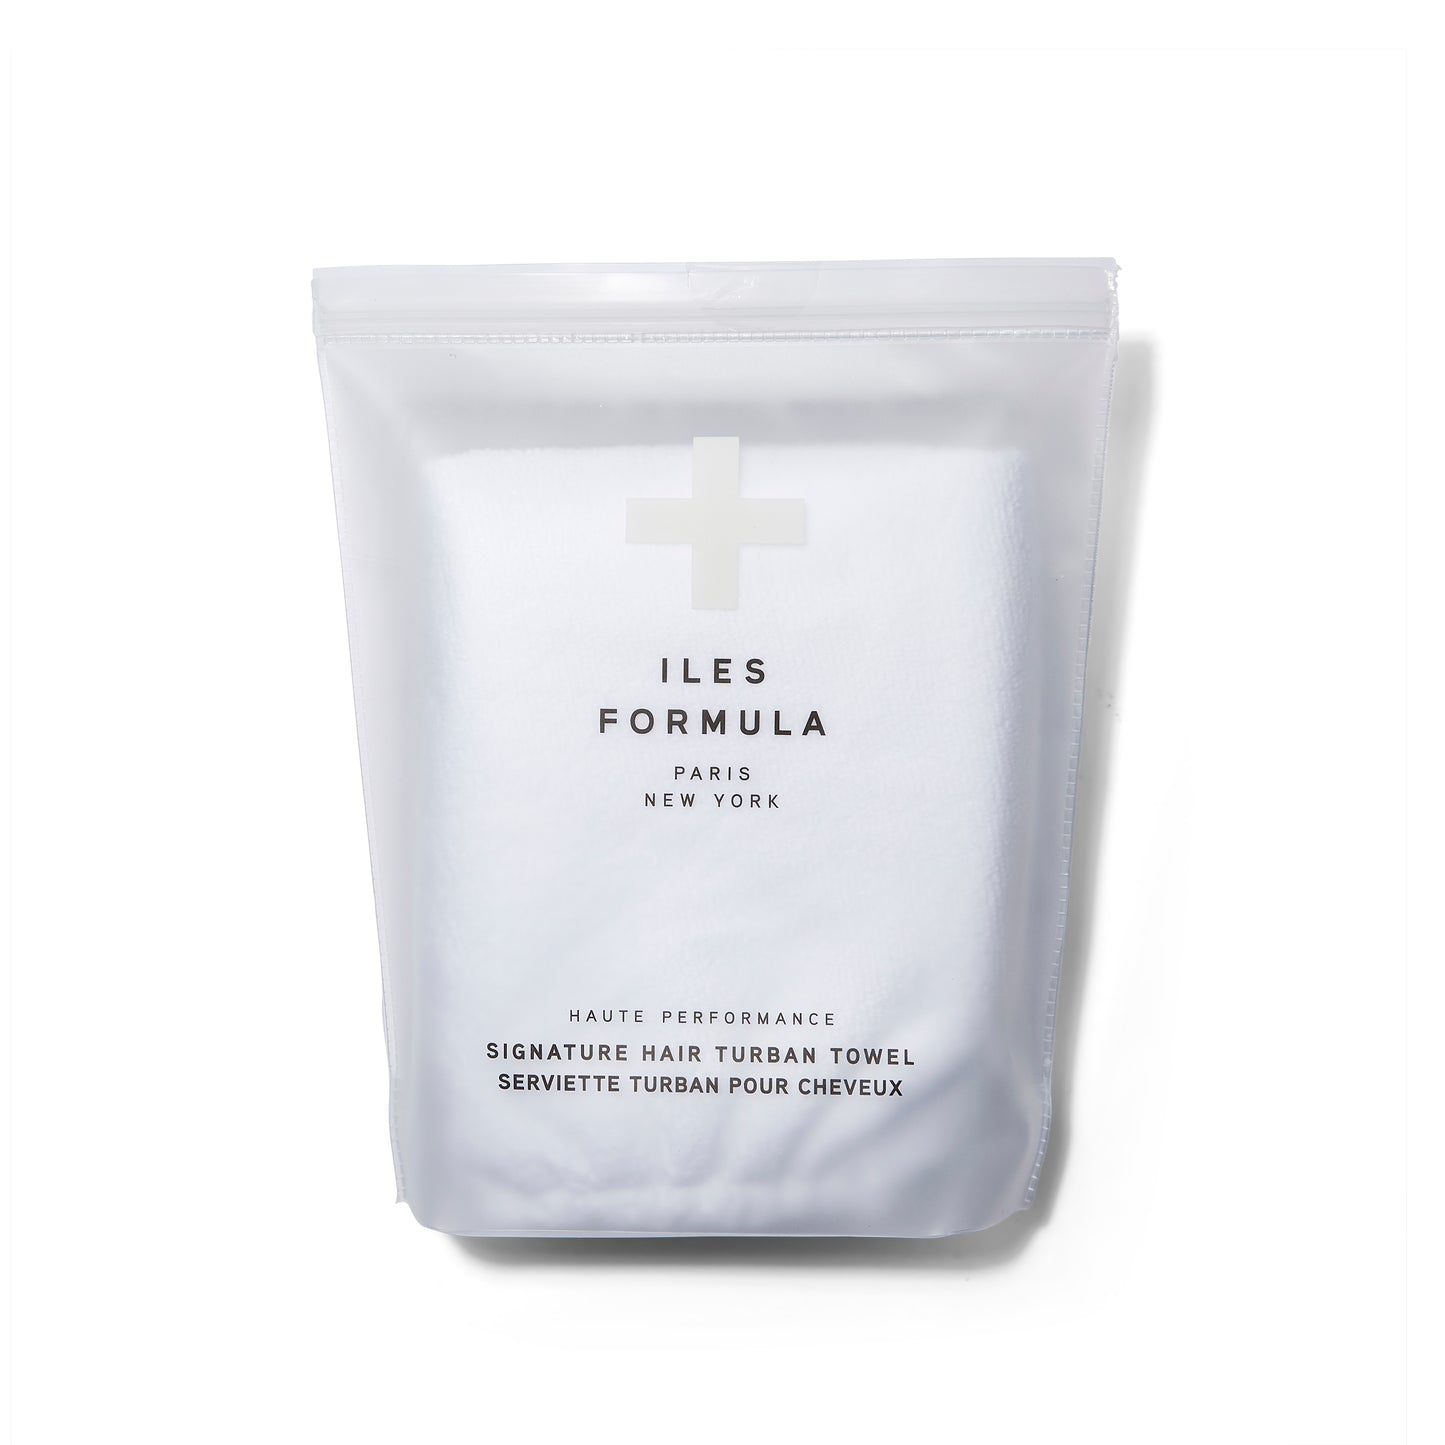  Iles Formula Signature Hair Turban Towel in white in it's packaging.